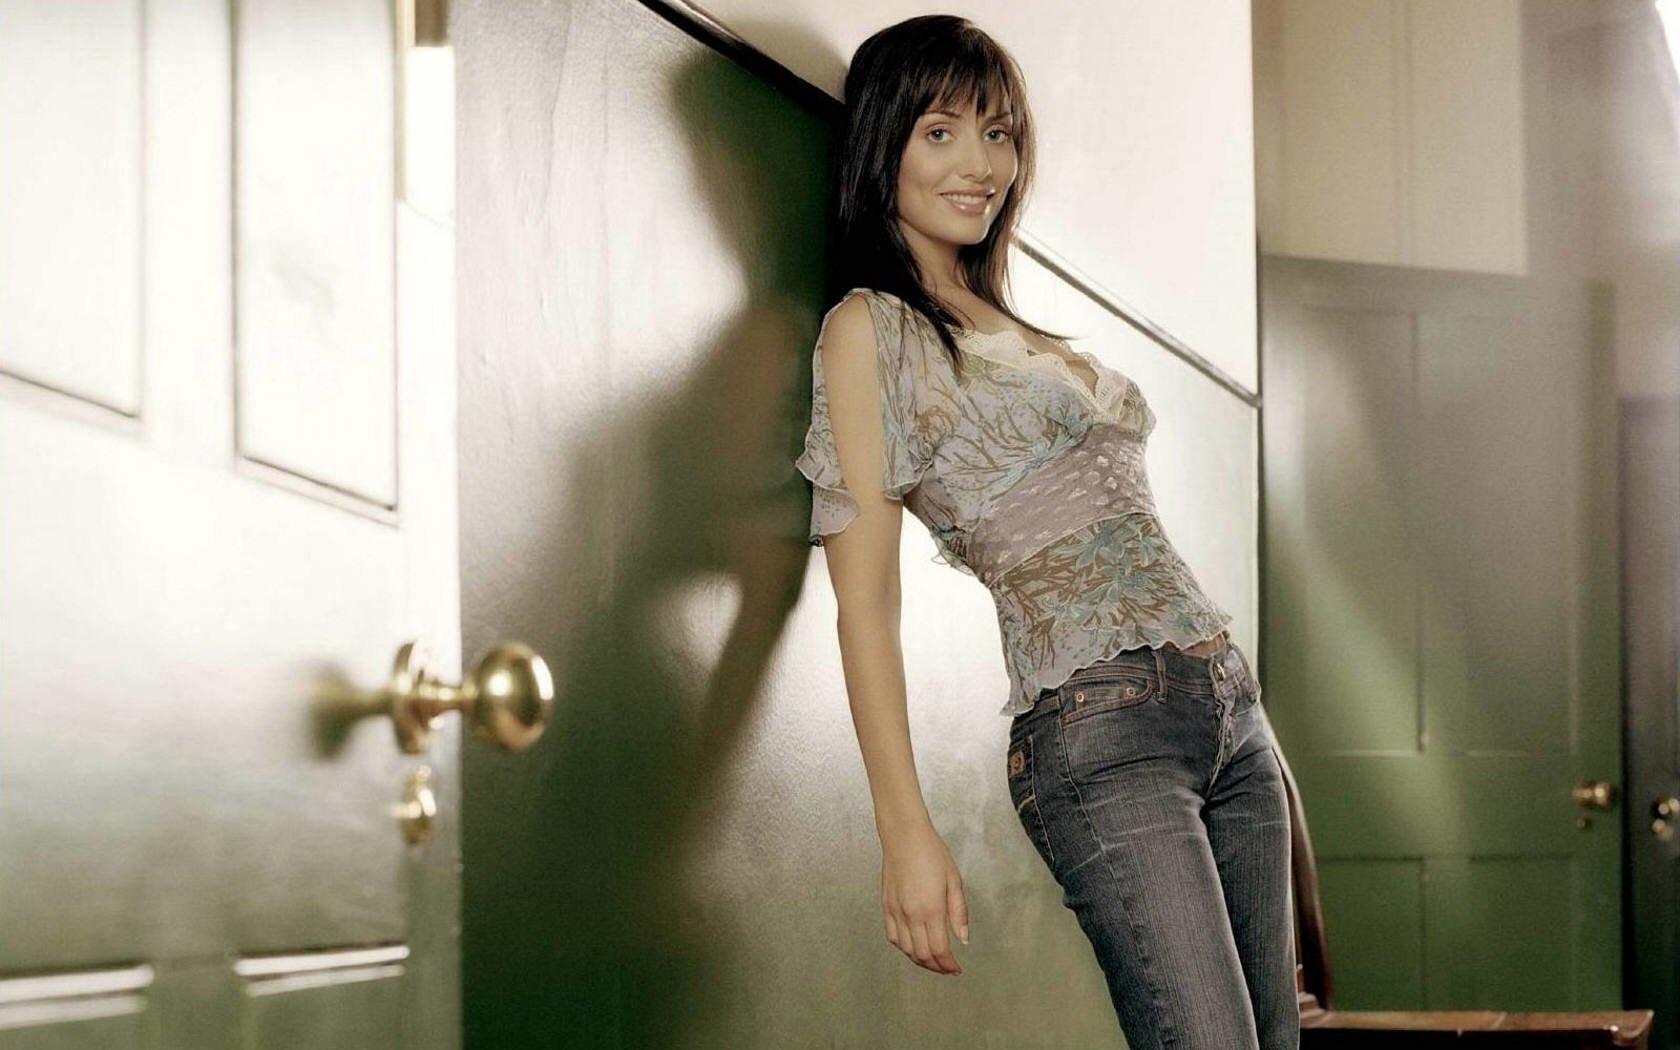 Natalie Imbruglia Wallpaper and Background Imagex1050